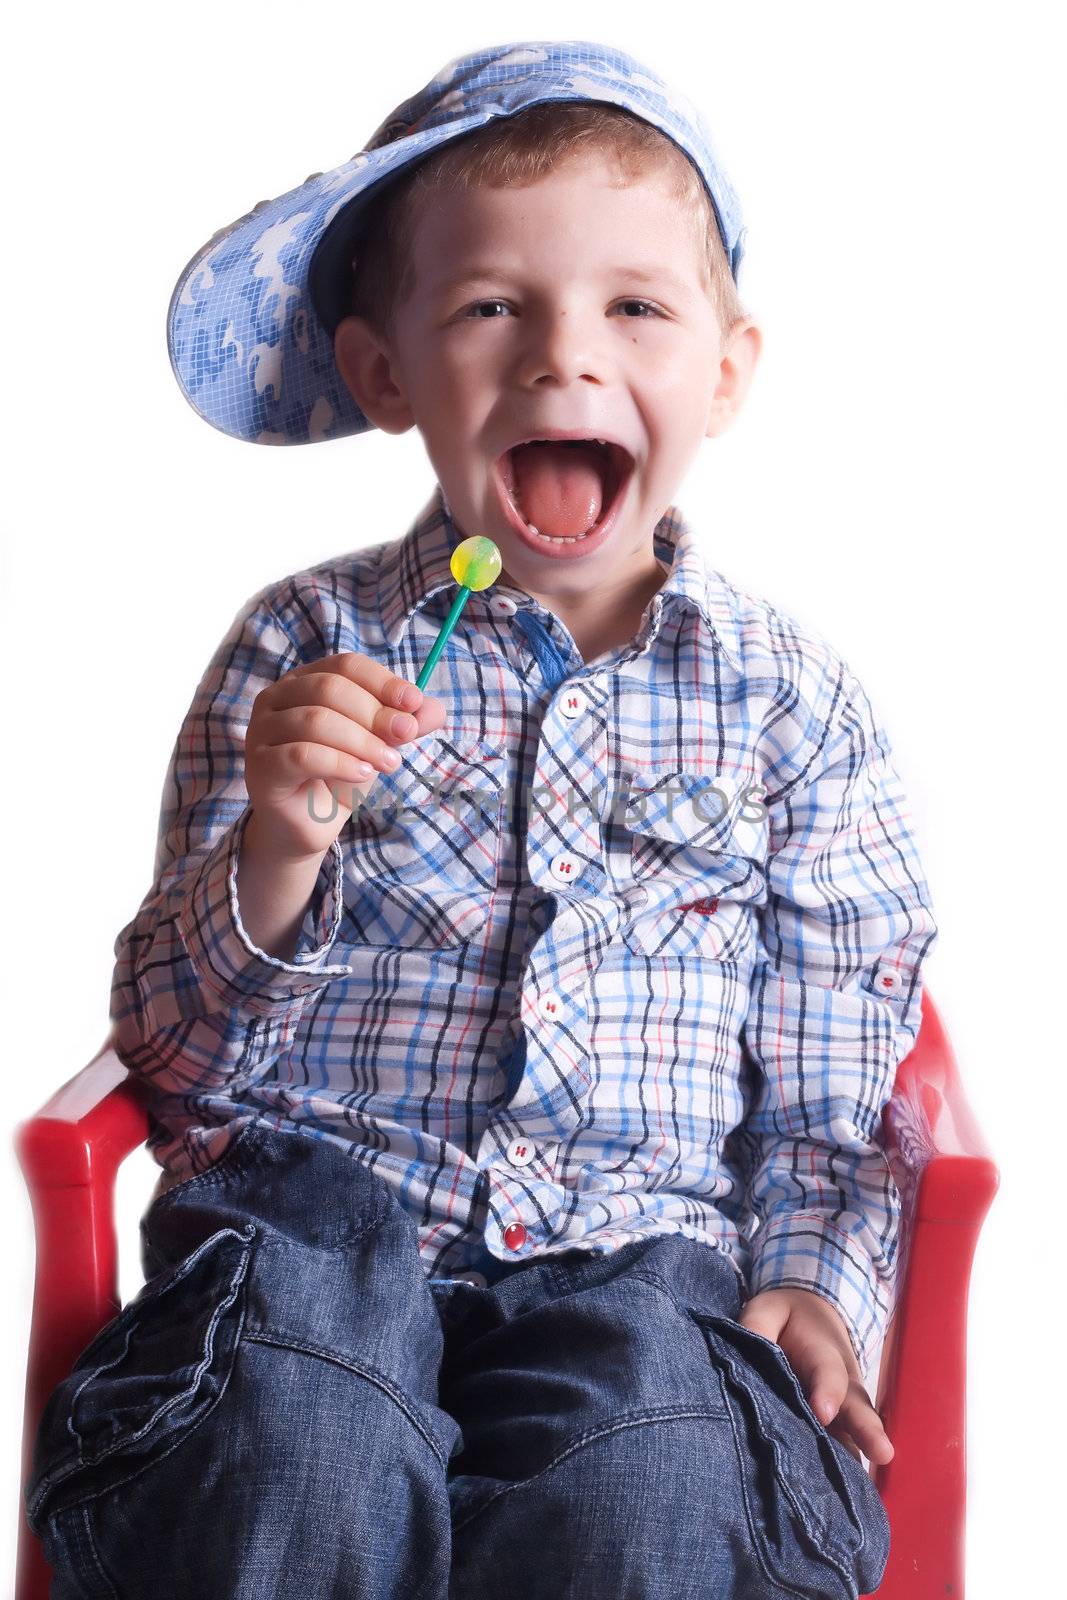 boy with an open mouth with a lollipop in his hand on a light background